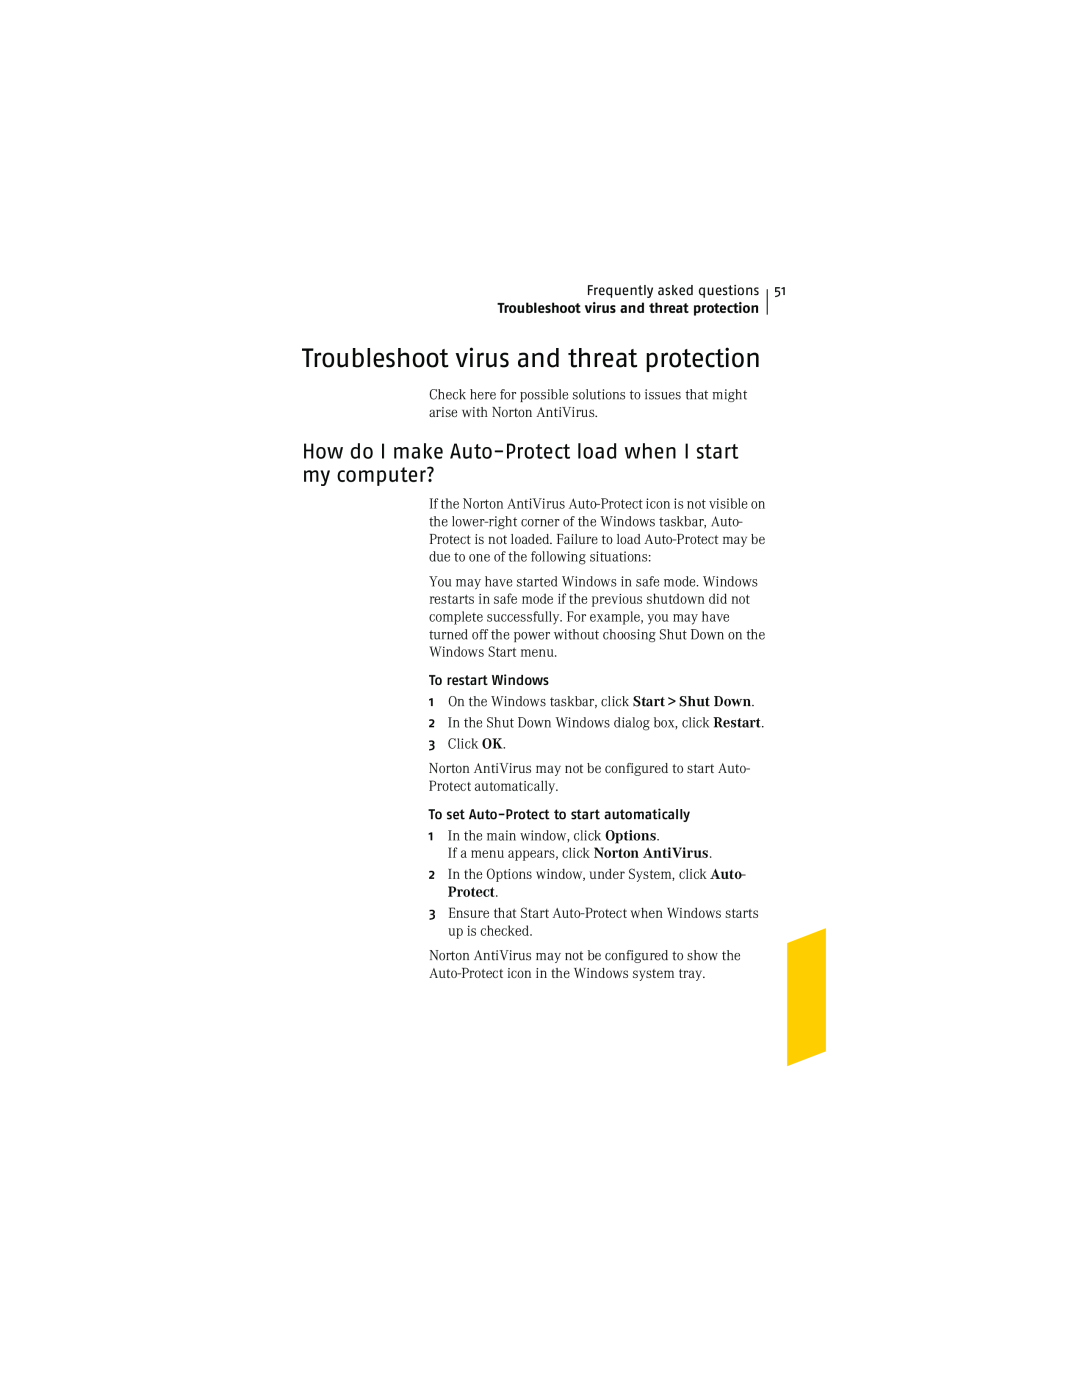 Symantec NIS2005 manual Troubleshoot virus and threat protection 